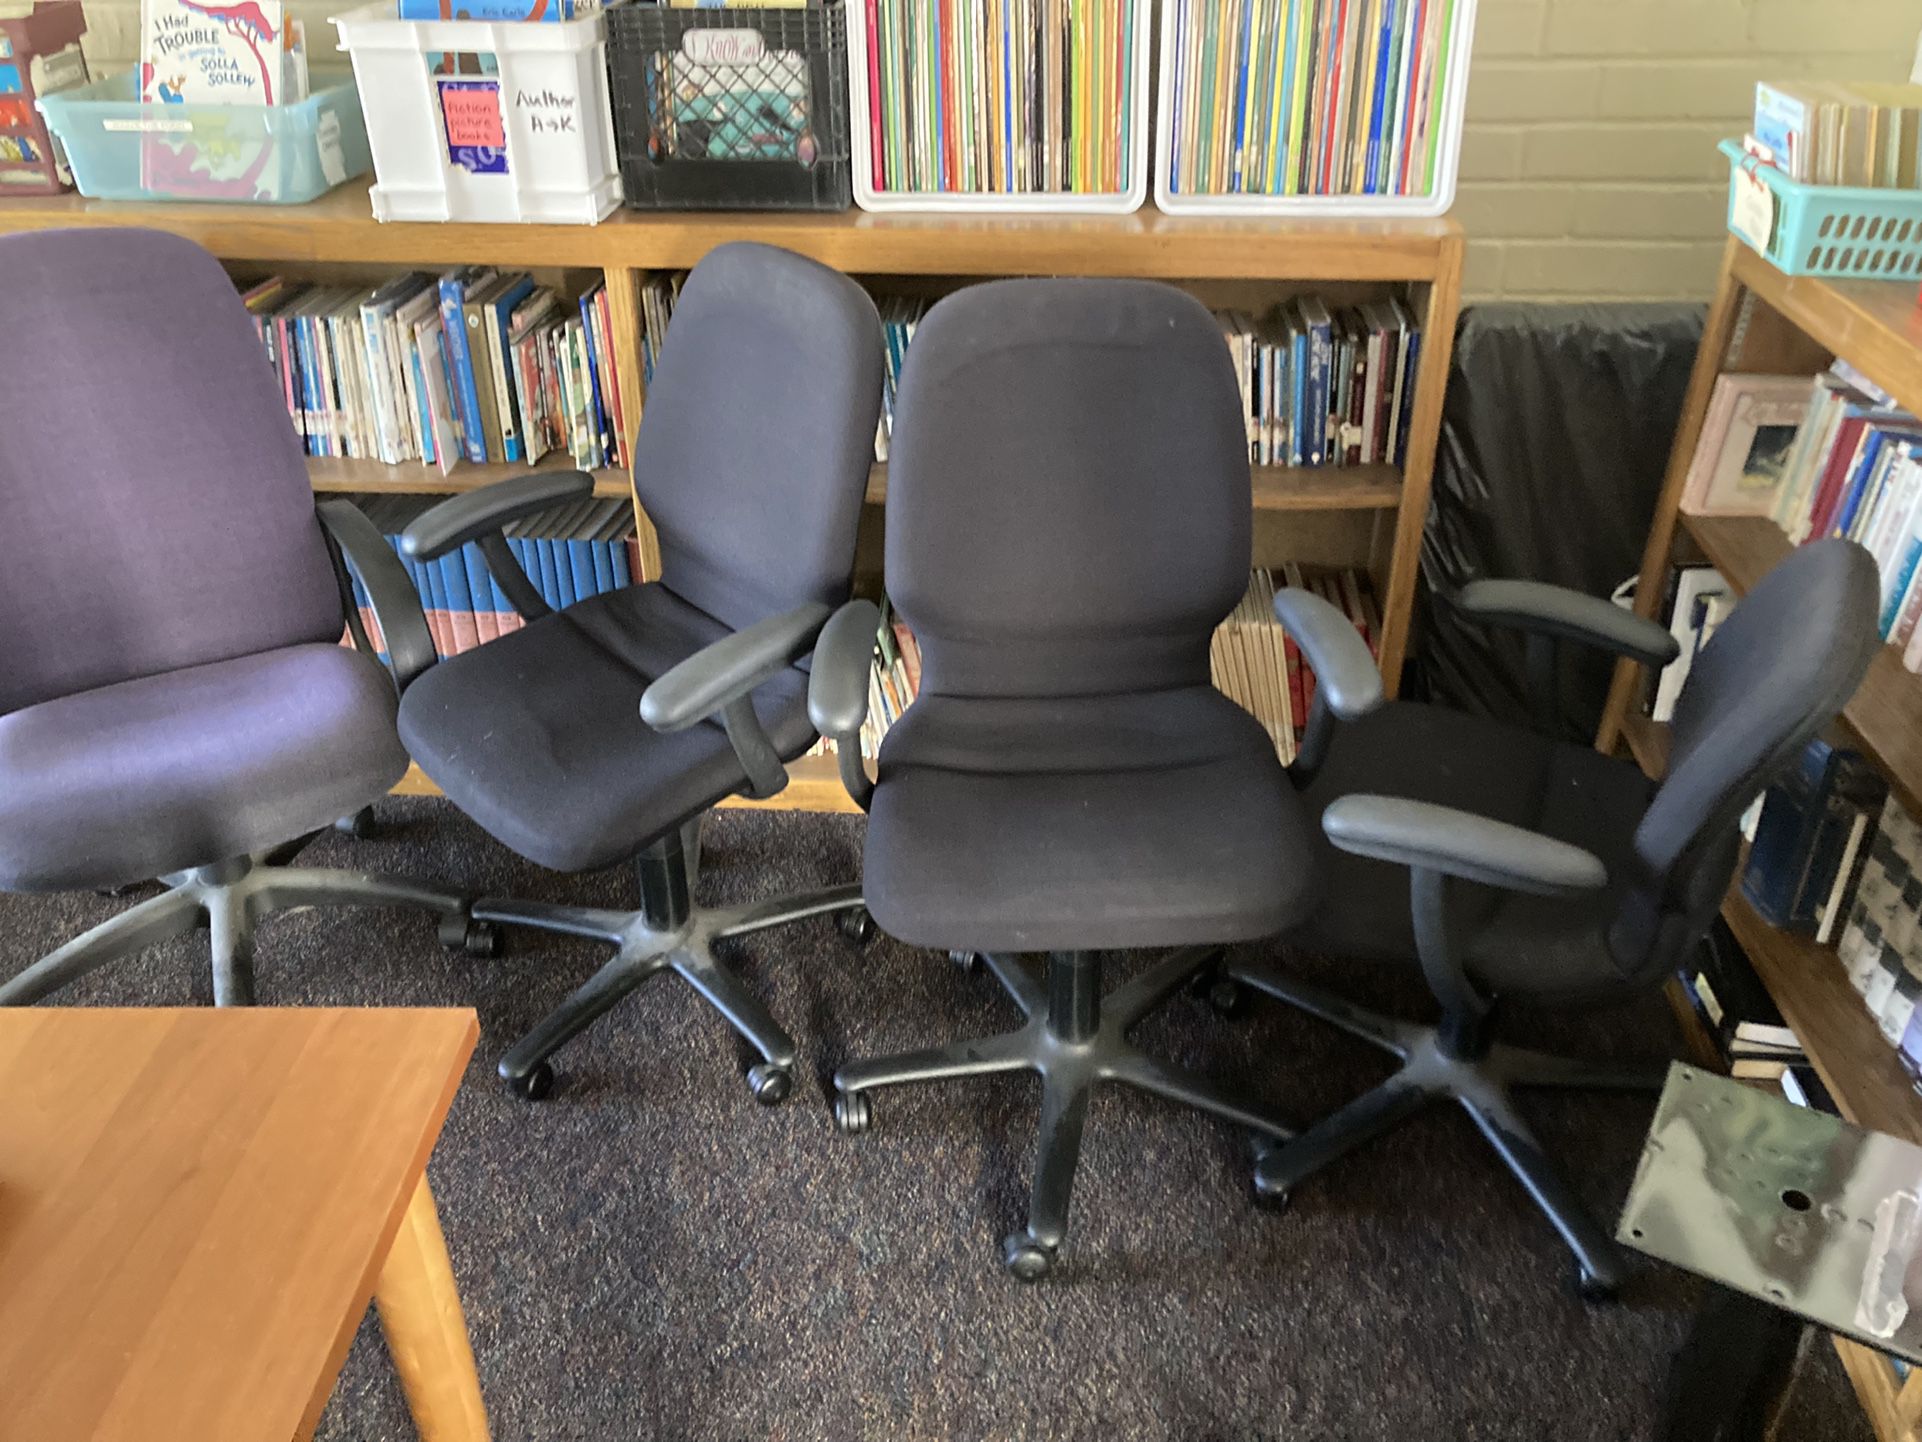 Desk Chairs 